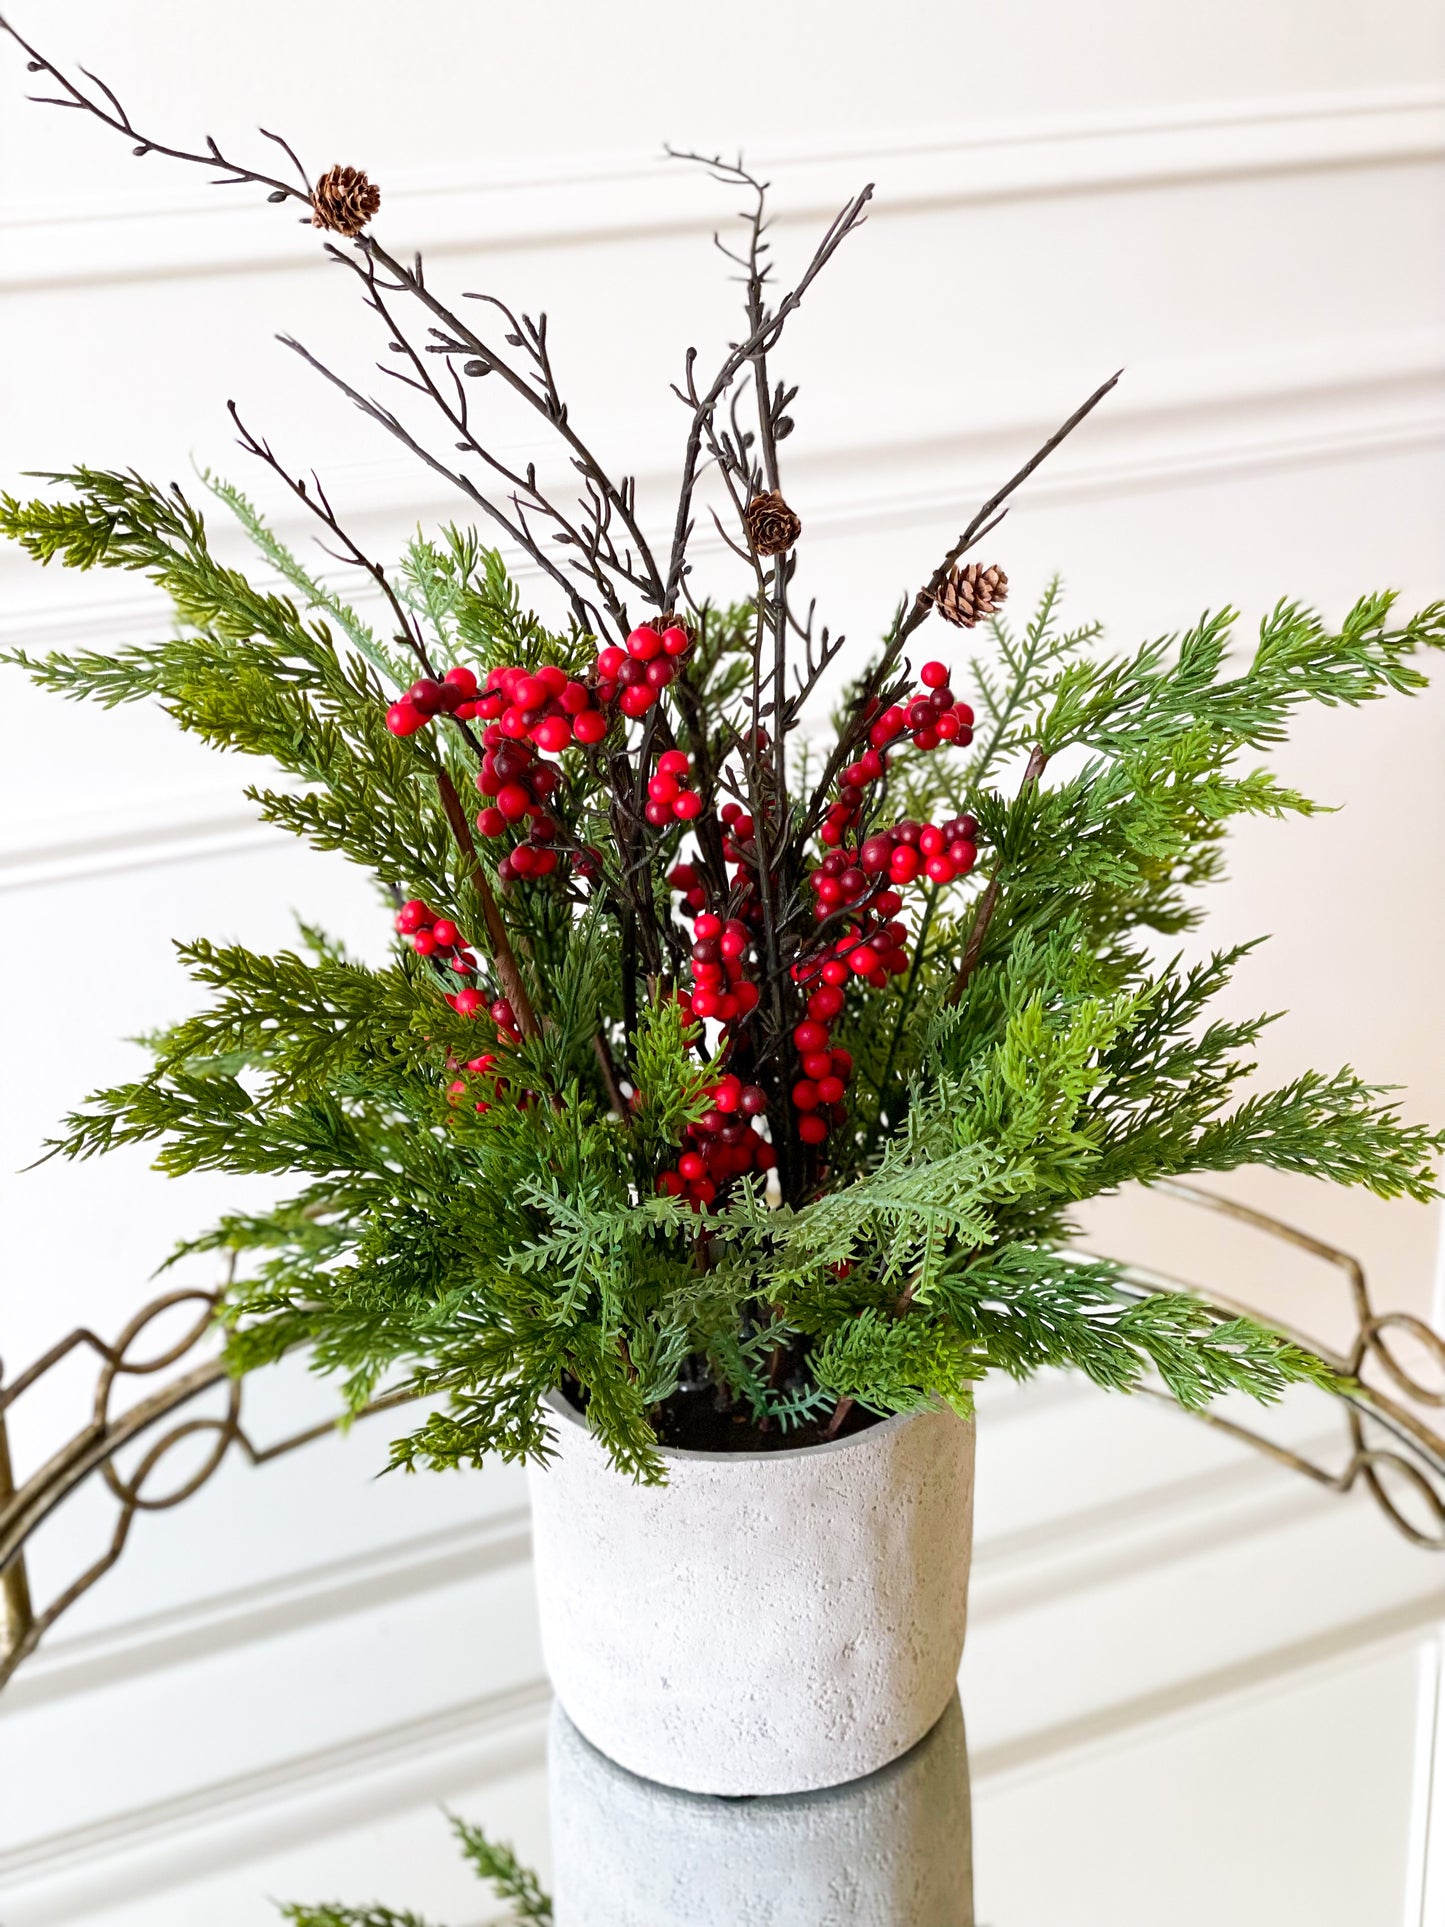 Potted Cedar And Berry Stems